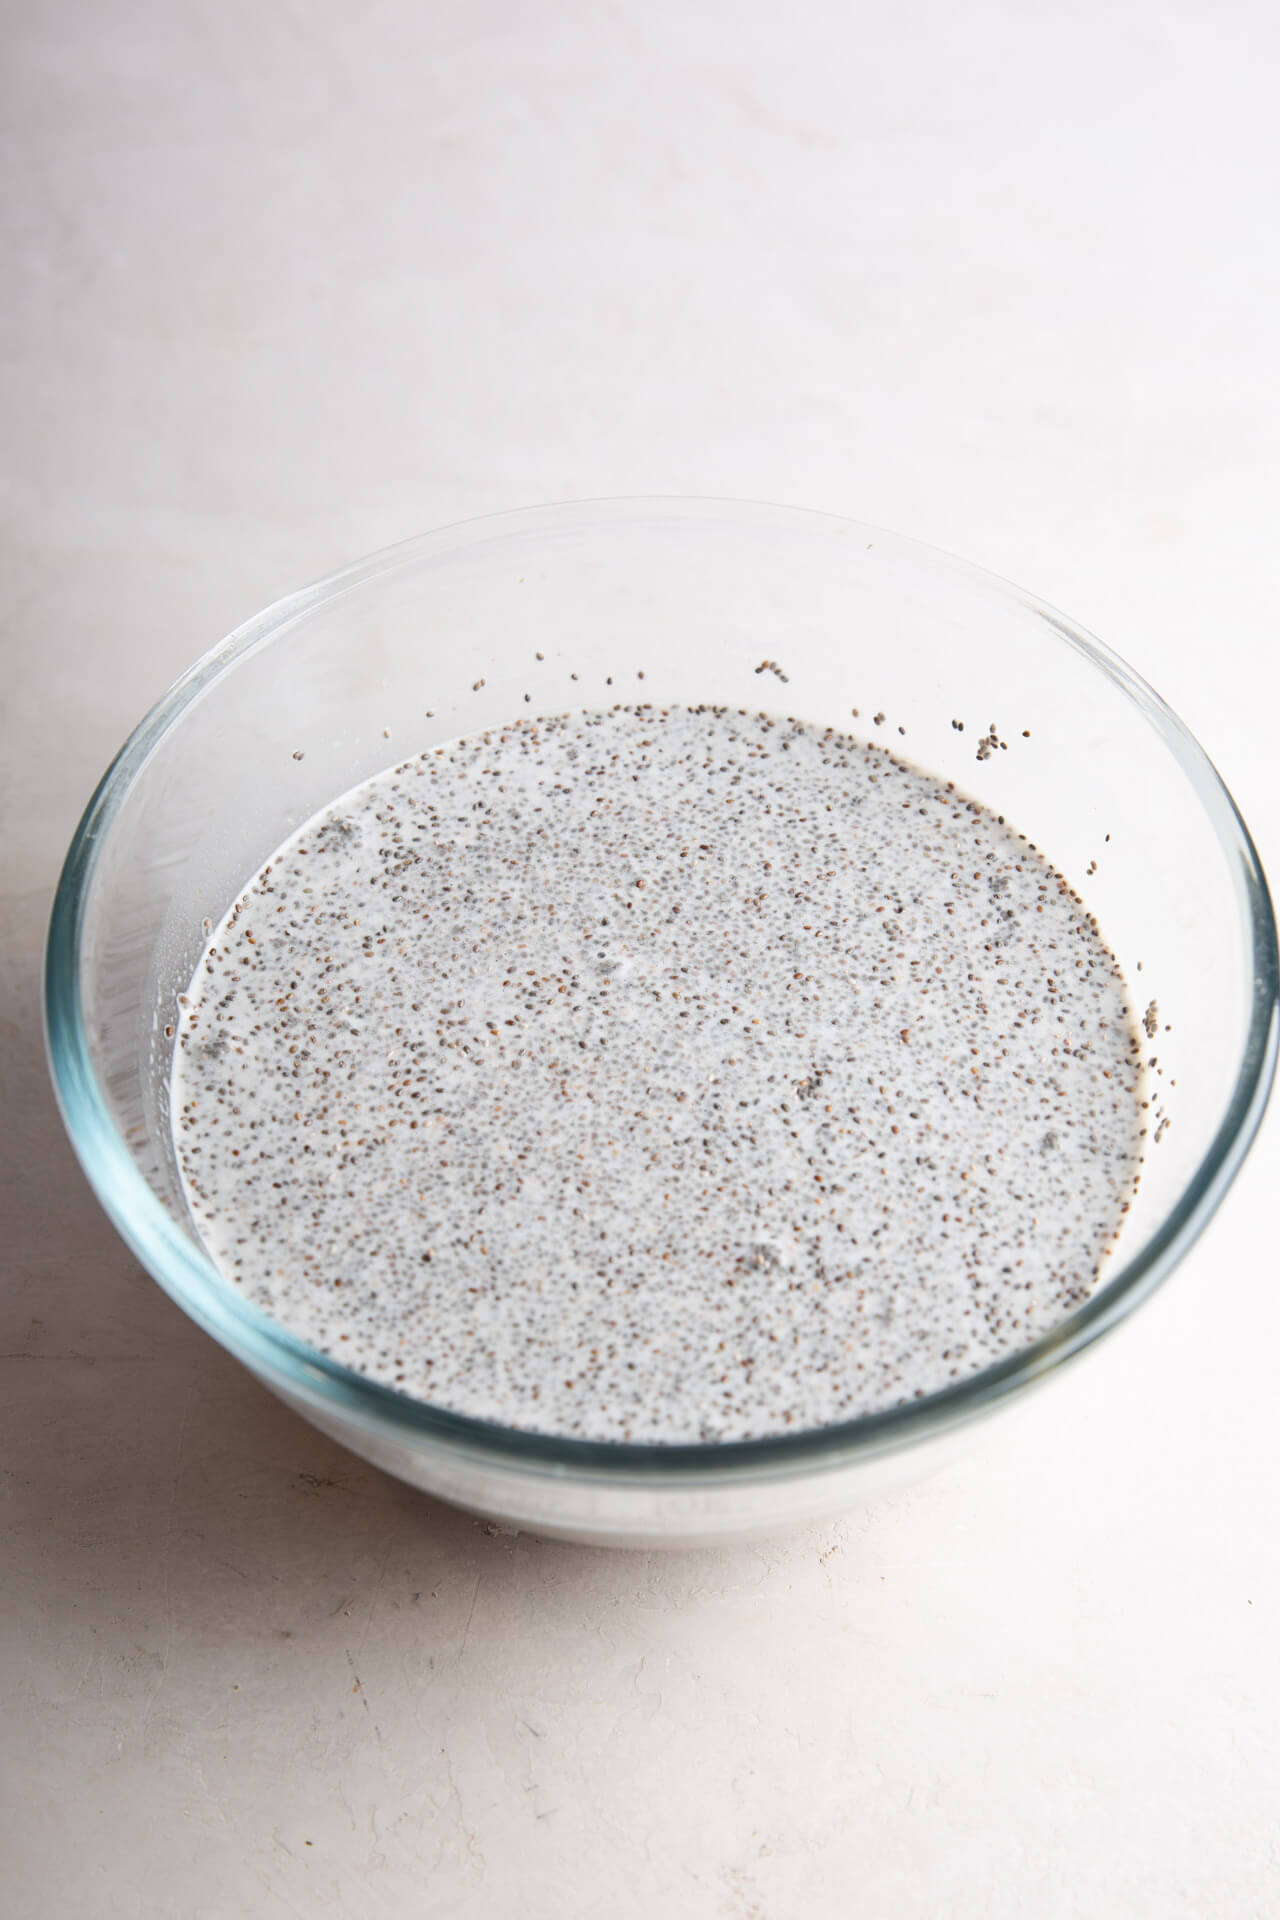 chia seeds soaking in a bowl